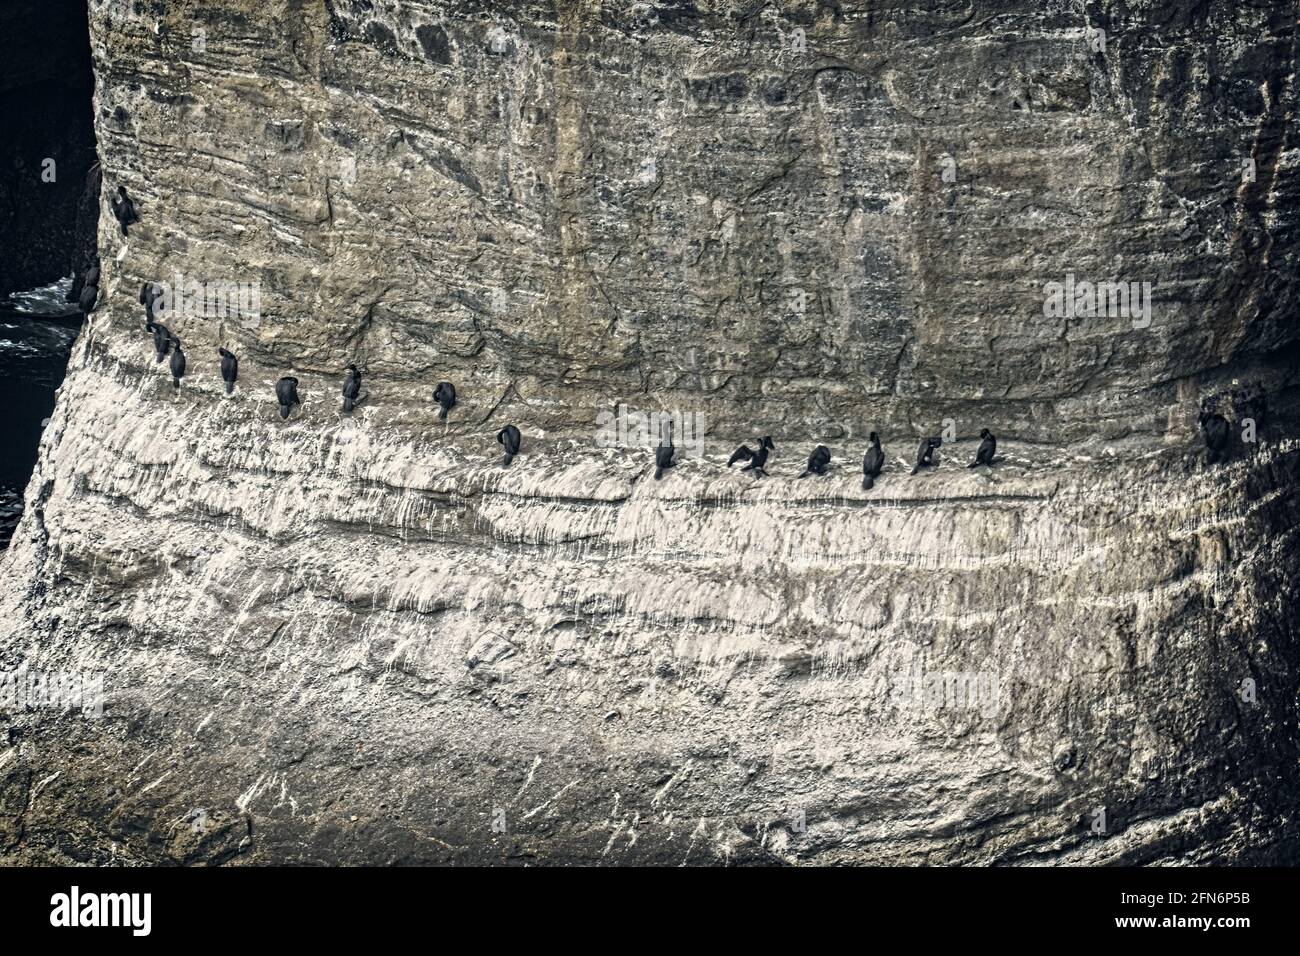 Get Your Ducks In A Row - a line of Black Cormorants along the face of an ocean bluff at Cape Flattery. Stock Photo